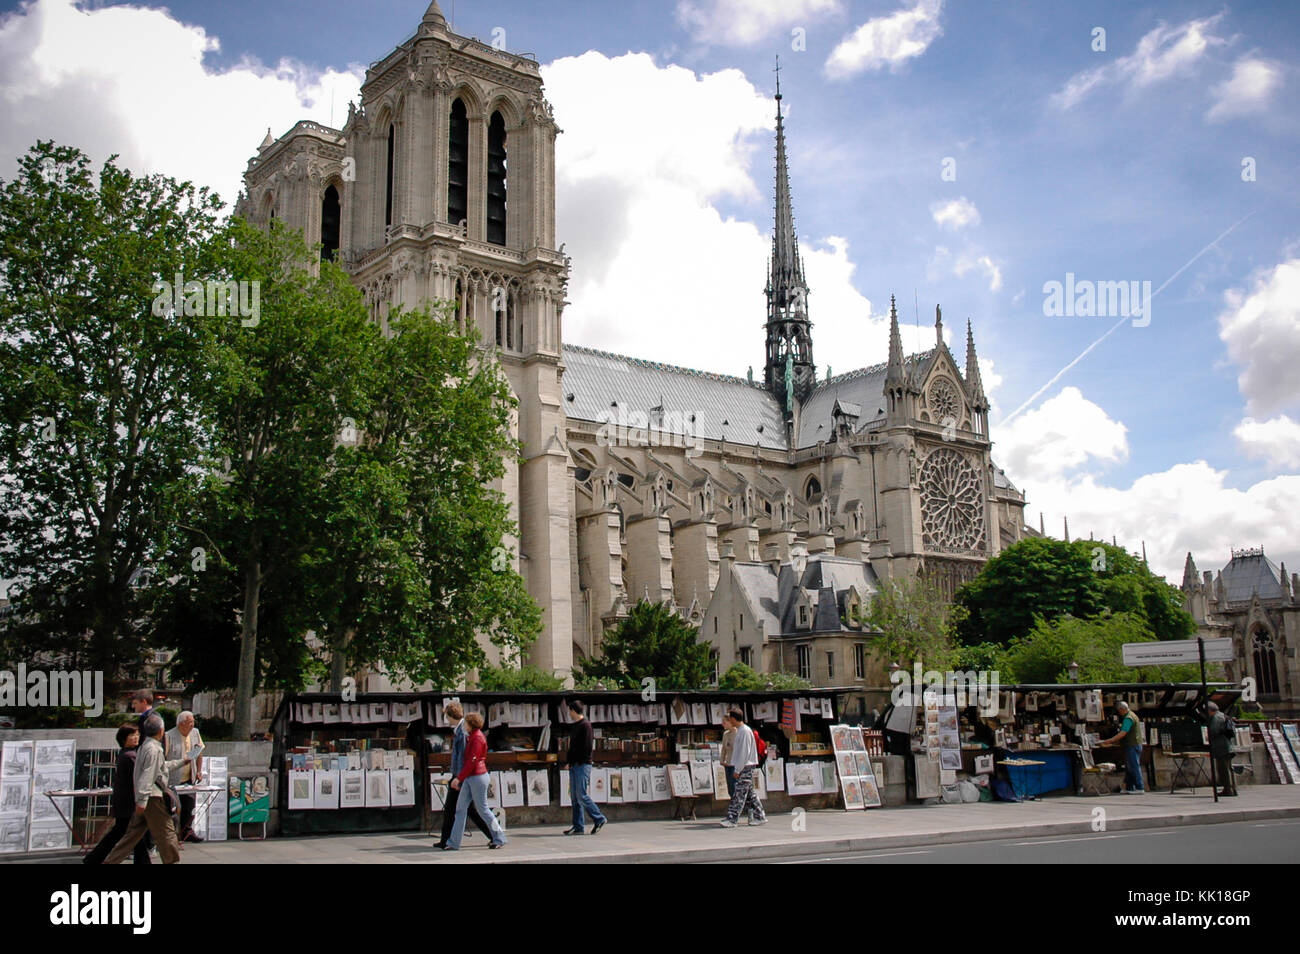 Famous Medieval Cathedral Notre-Dame de Paris the finest example of French Gothic architecture and among the largest churches in France Stock Photo